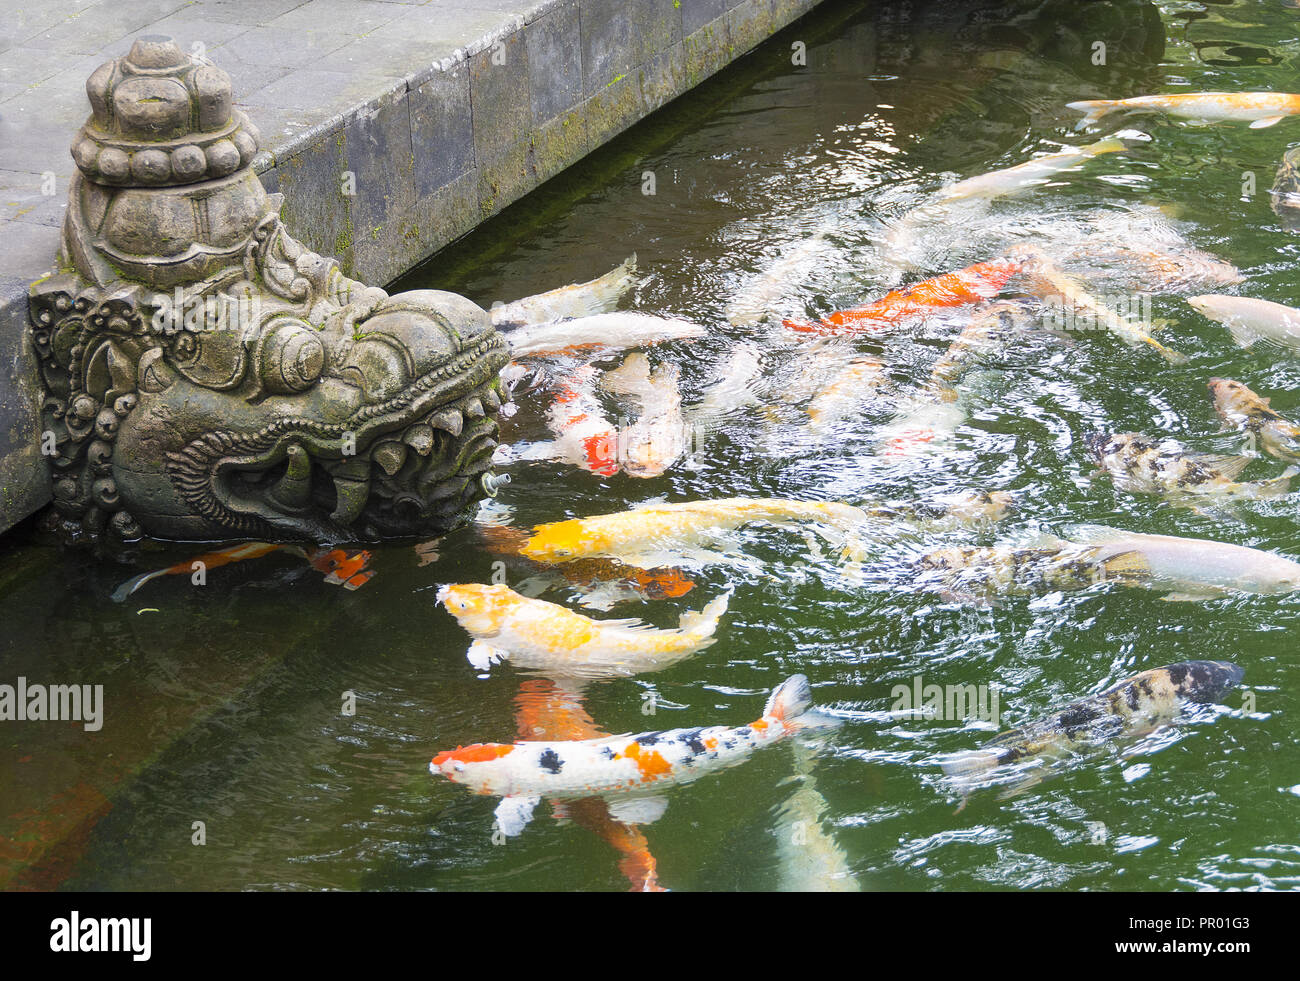 Temple fish pond with colorful Koi carp swimming near a typical Balinese Hindu stone deity figure. Stock Photo